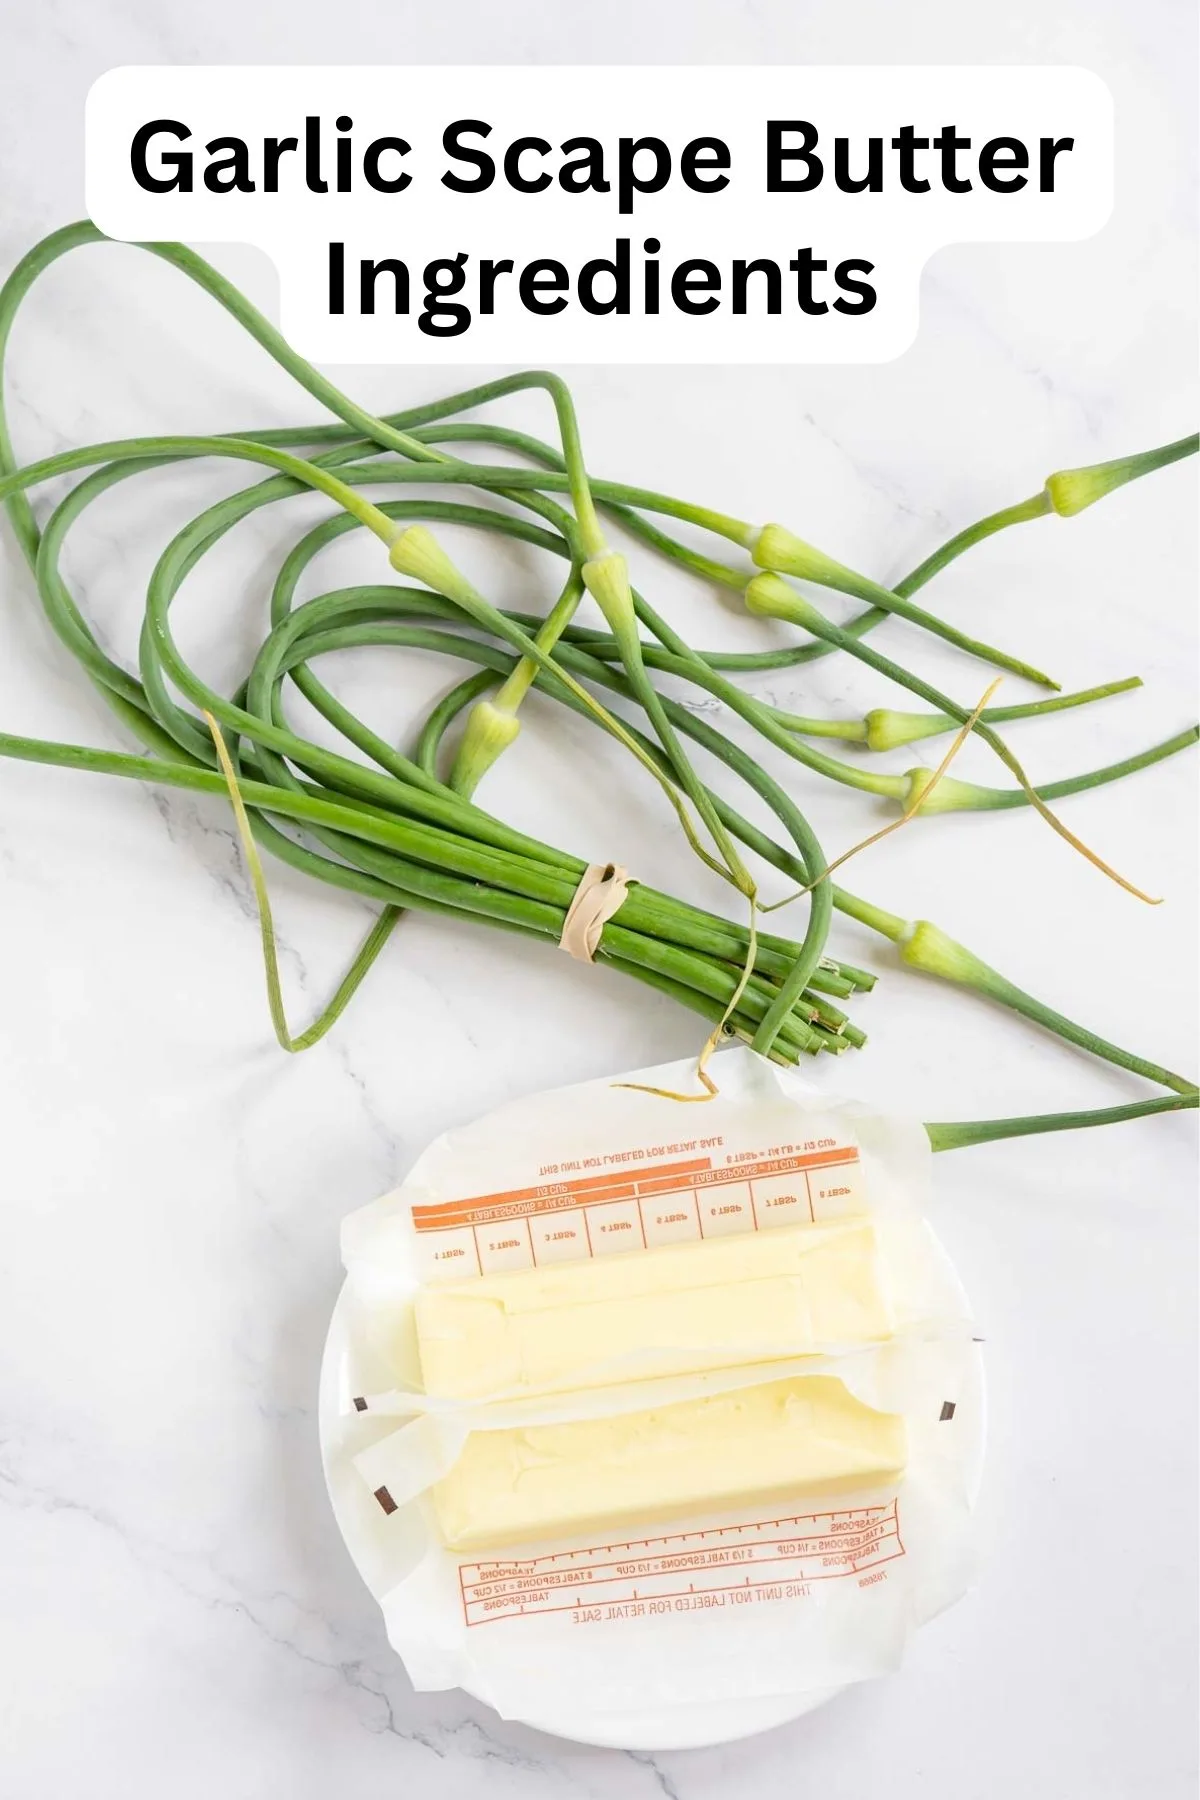 Ingredients to make garlic scape butter